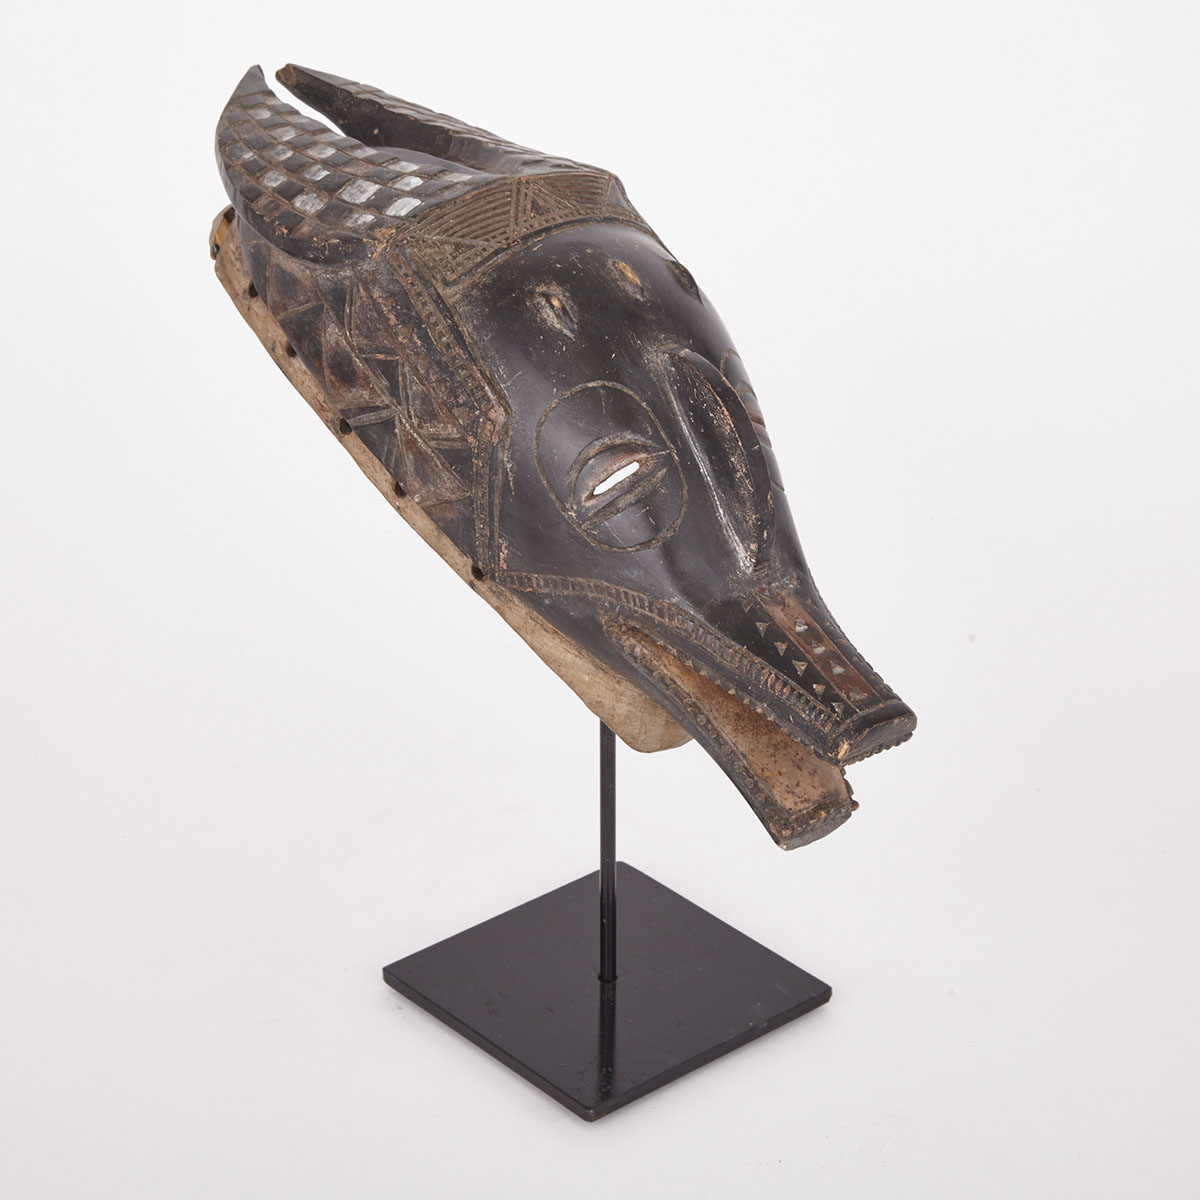 Guro Zamble Zoomorphic Carved and Painted Wood Mask, West Africa, 20th century